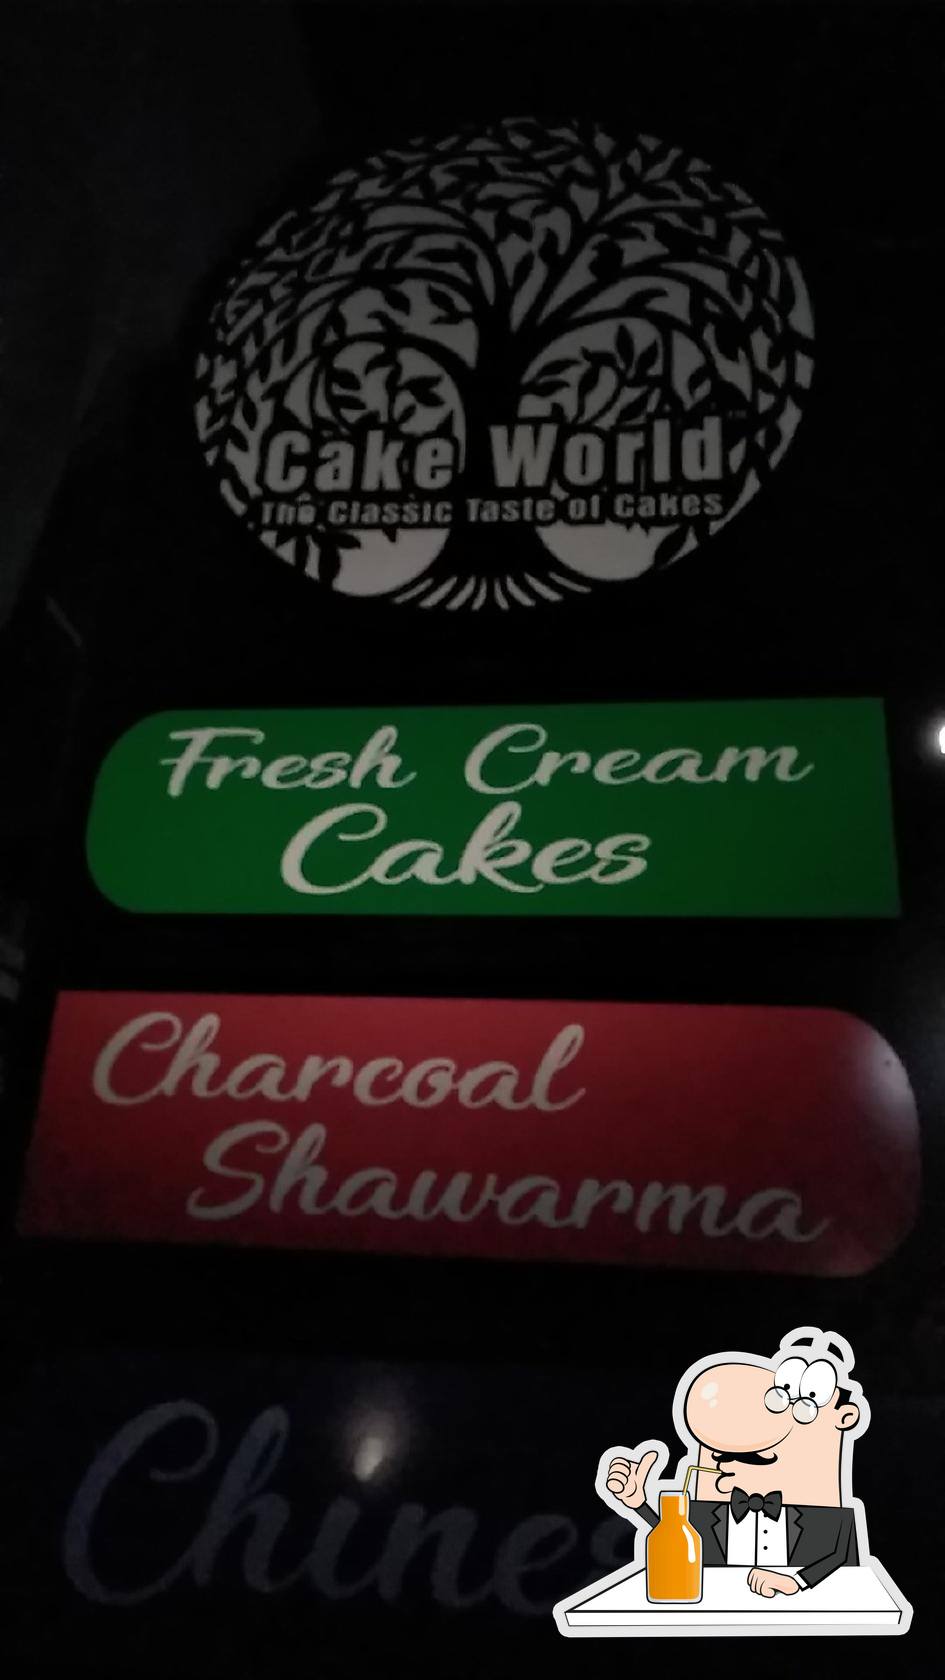 Cake World - Introducing new additions to our menu. Visit... | Facebook